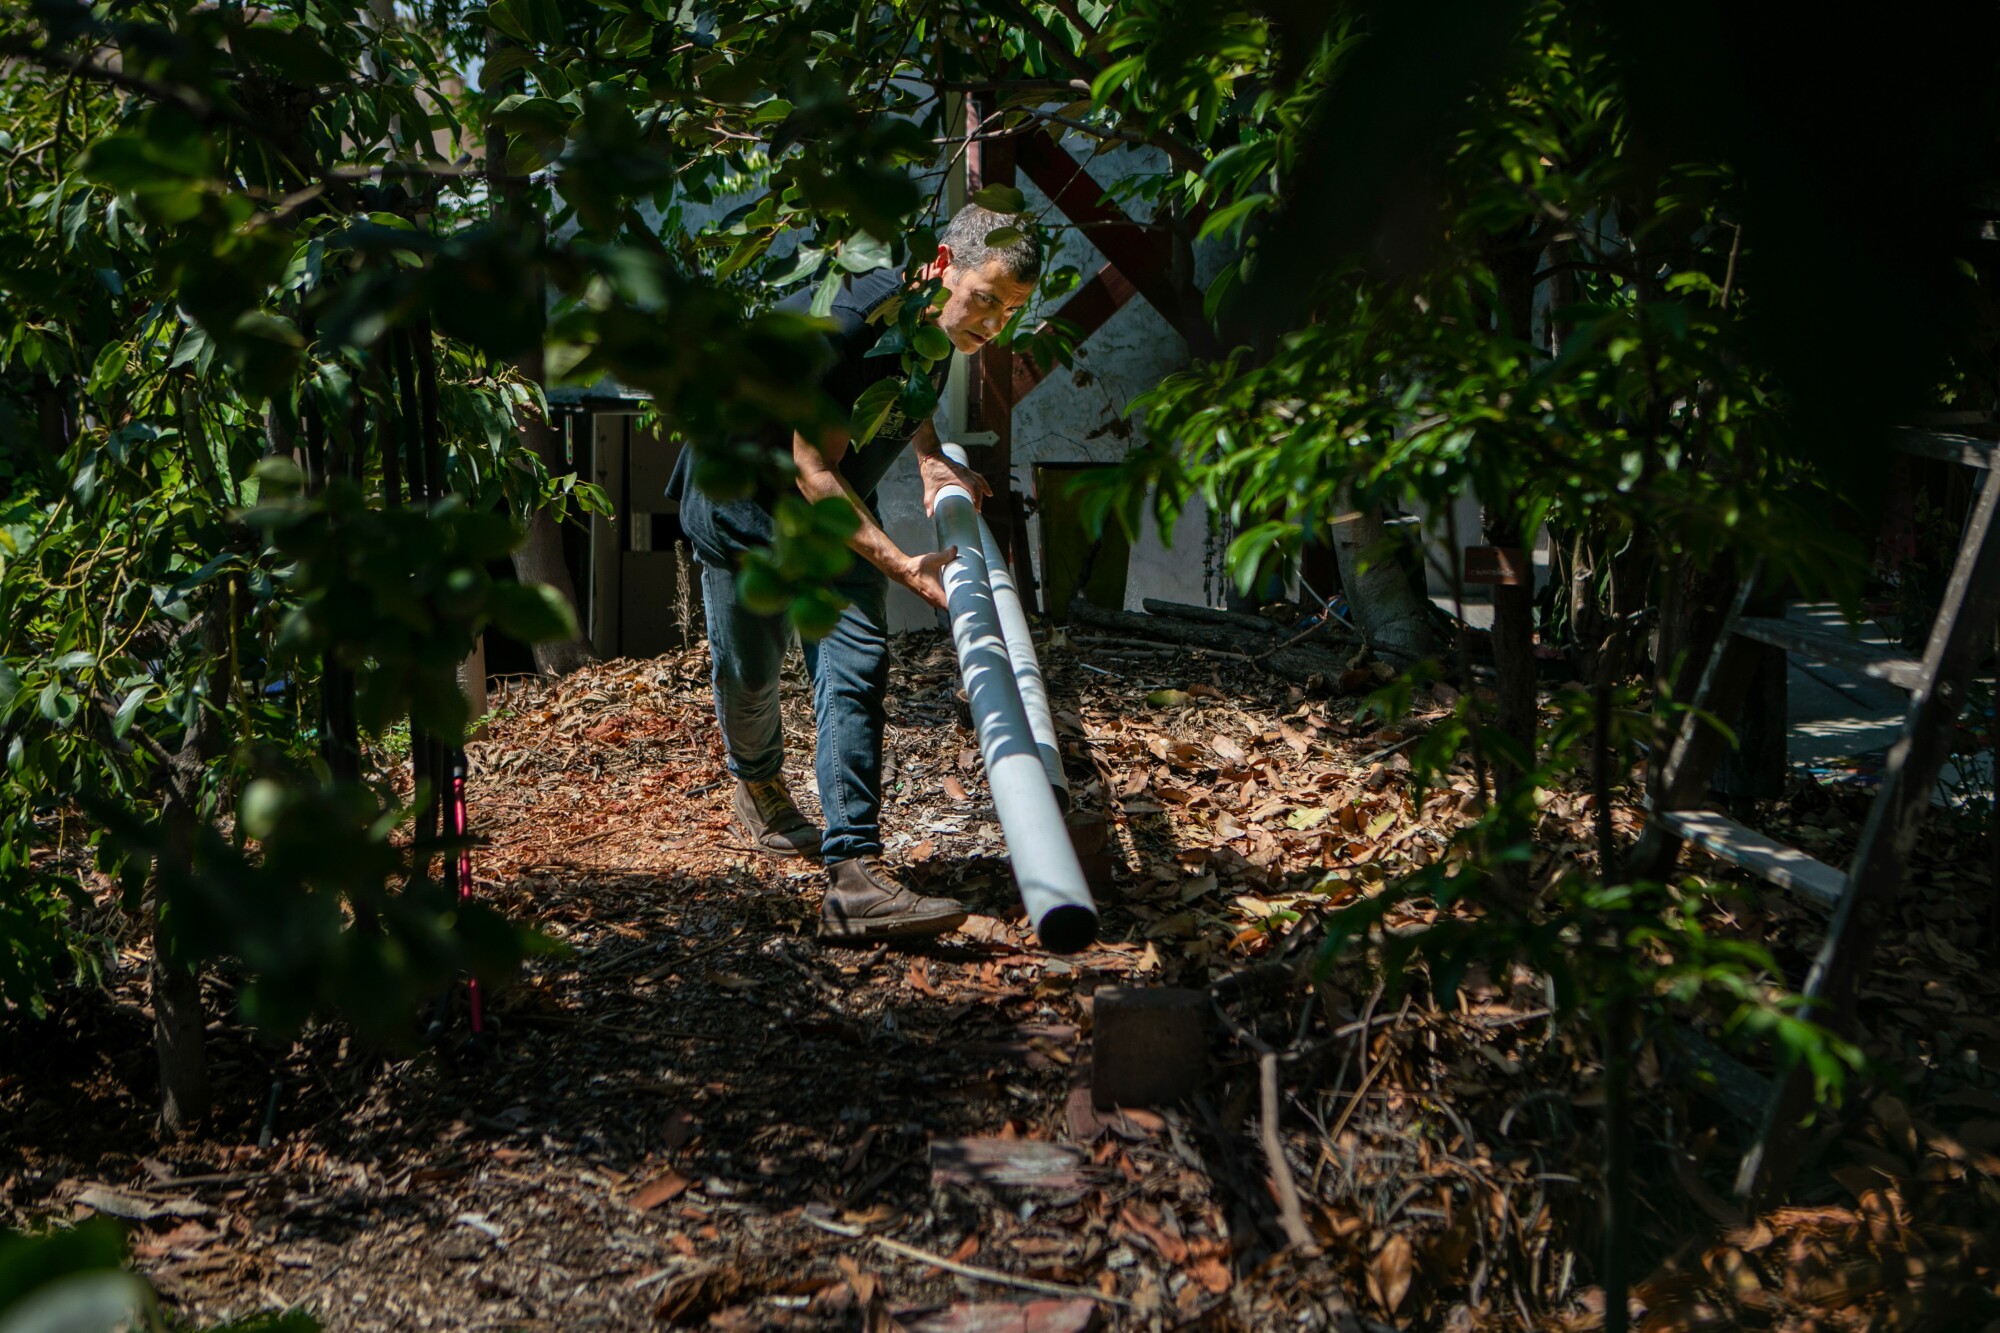 A man holds pipes and crouches as he walks through an orchard.